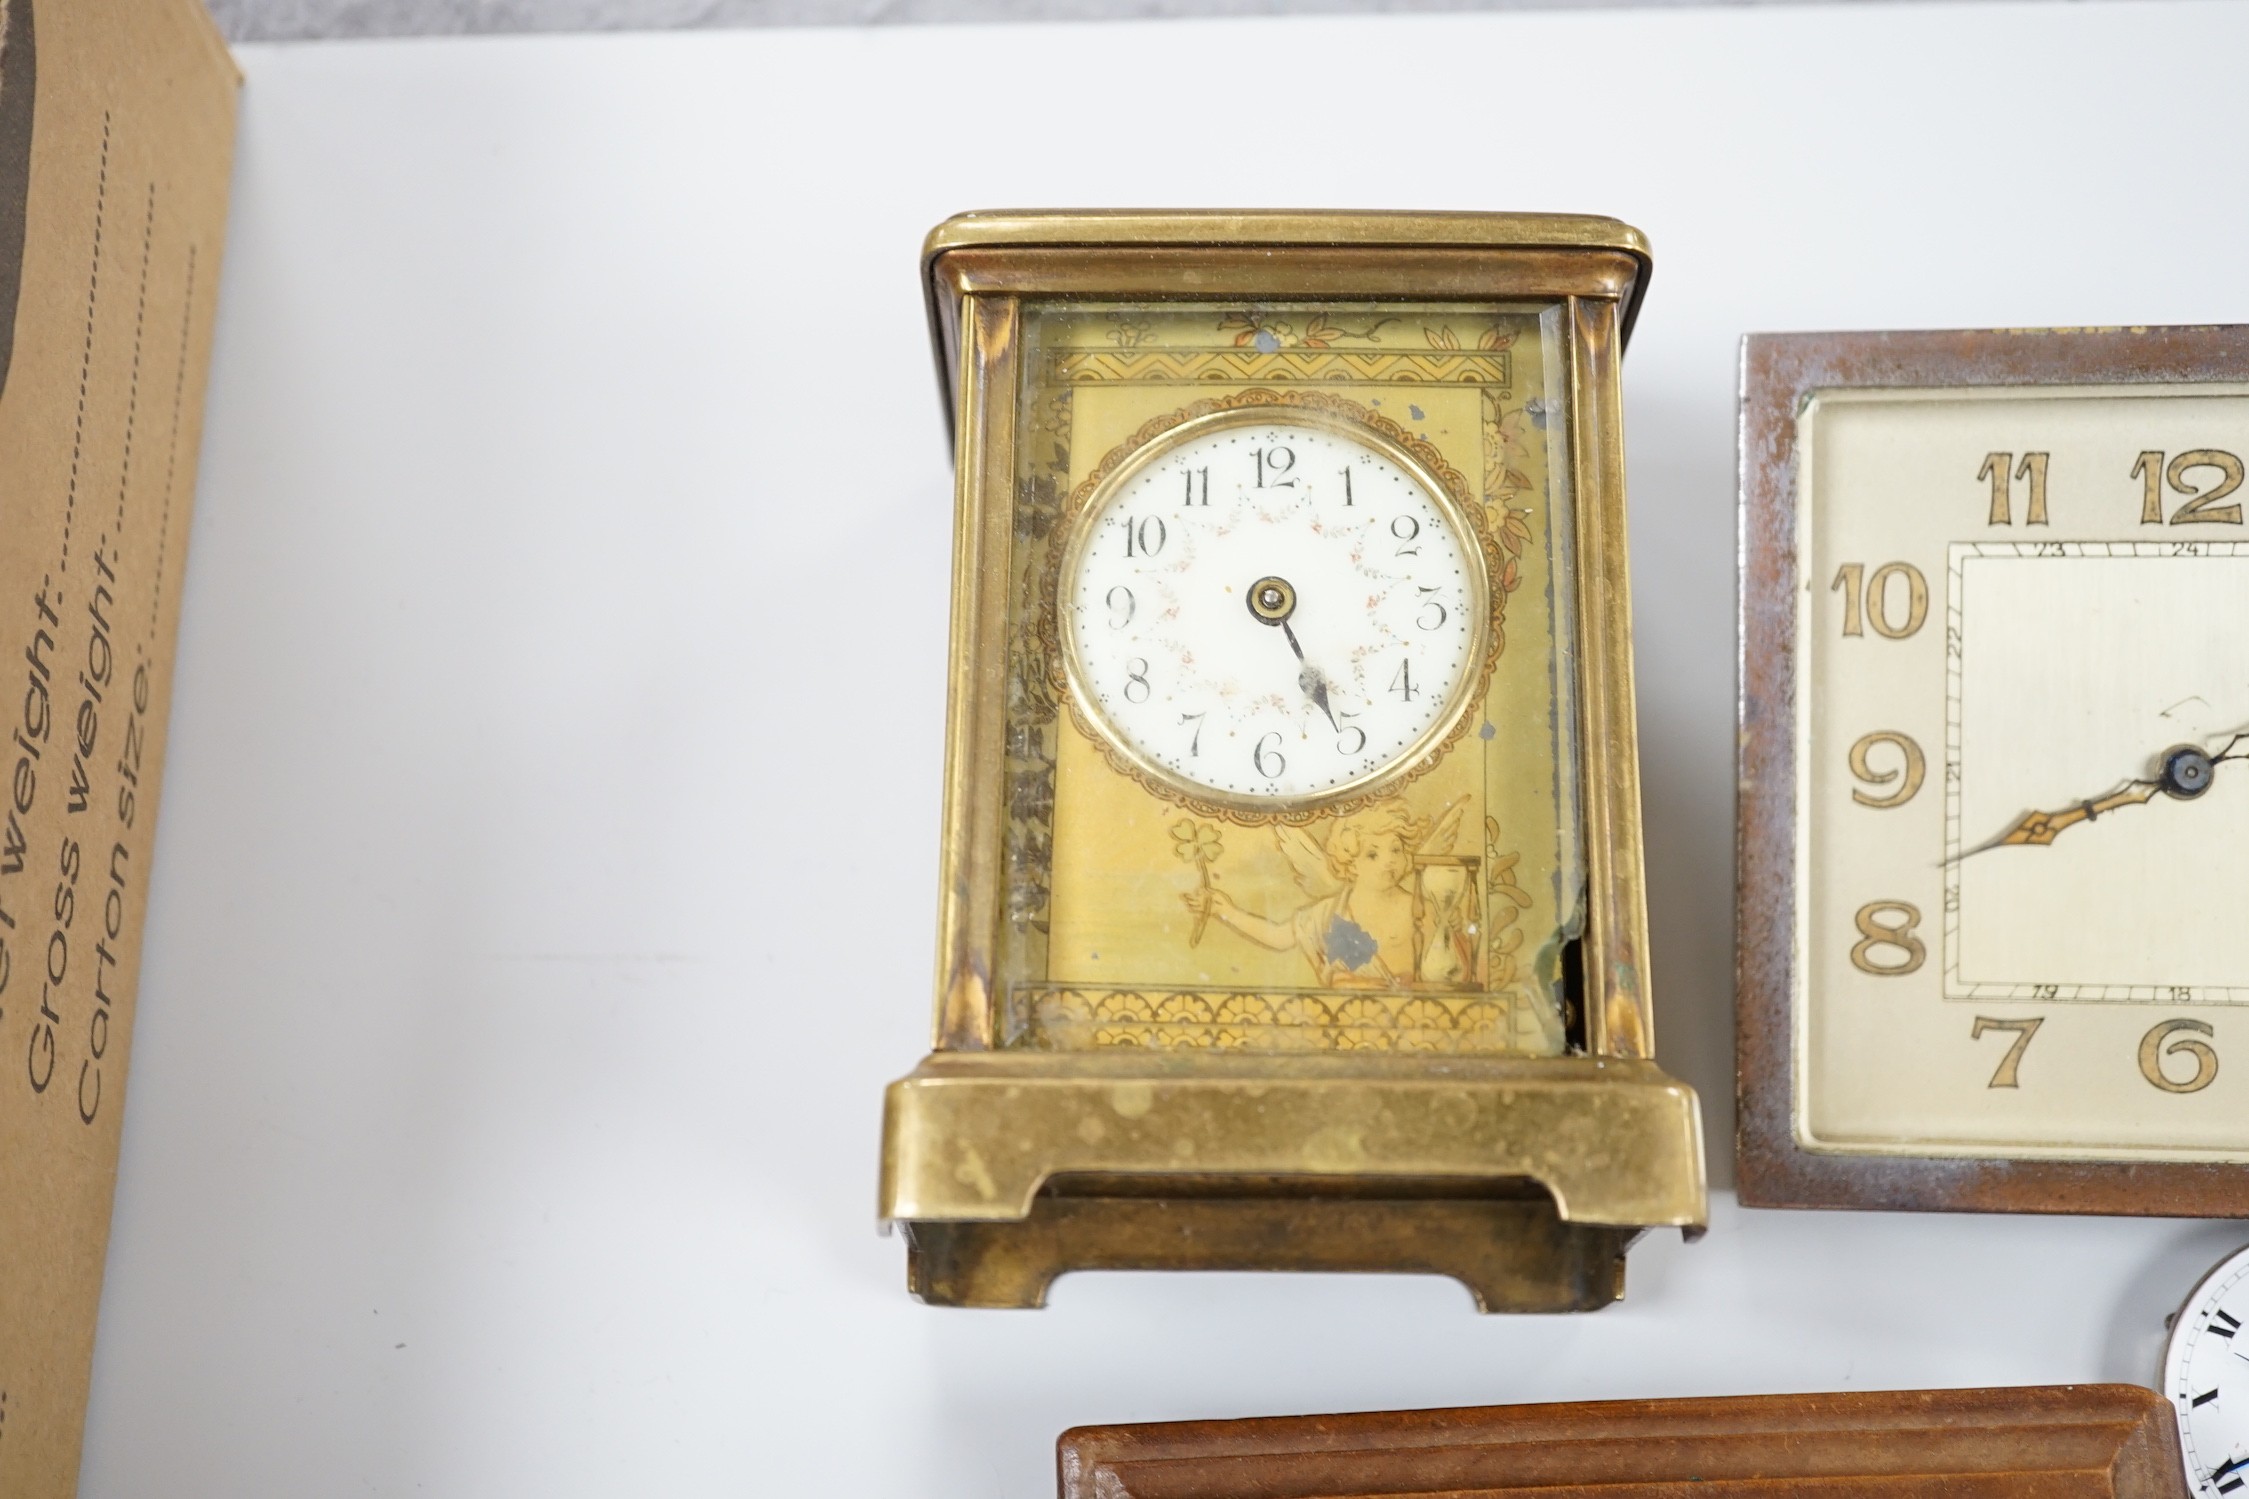 A group of wrist and pocket watches, stop watch, carriage clock, etc. - Image 6 of 6